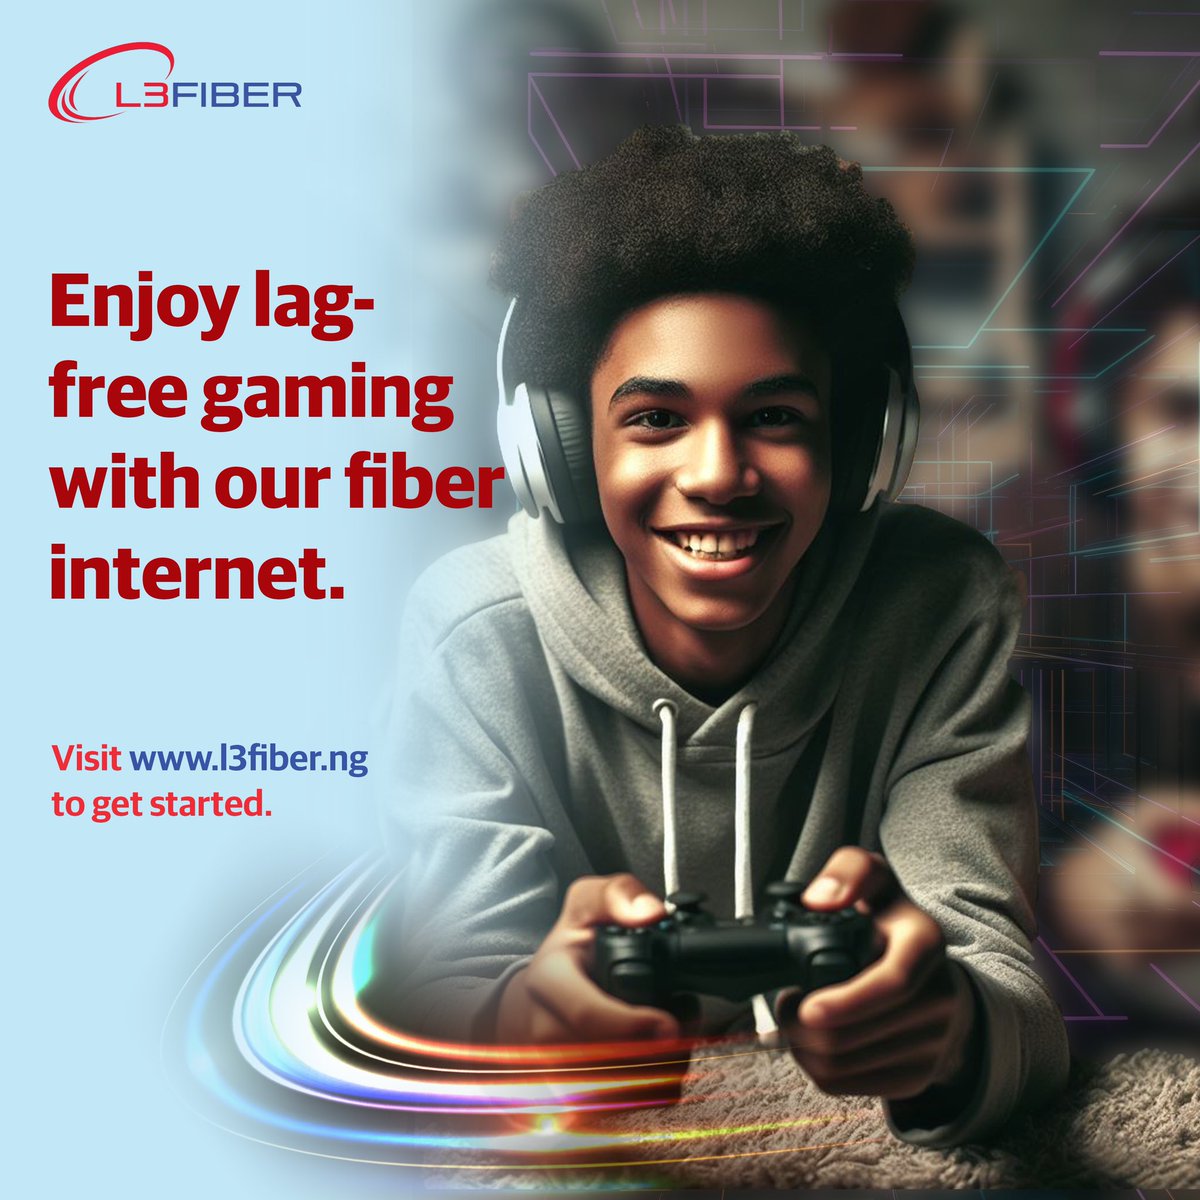 Don’t take our word for it. Simply visit our website, choose the plan you want and enjoy fast, secure and reliable fiber internet.

Visit l3fiber.ng to switch to Layer3Fiber today. 

#Layer3Fiber #BroadbandInternet #BroadbandinAbuja #FTTH